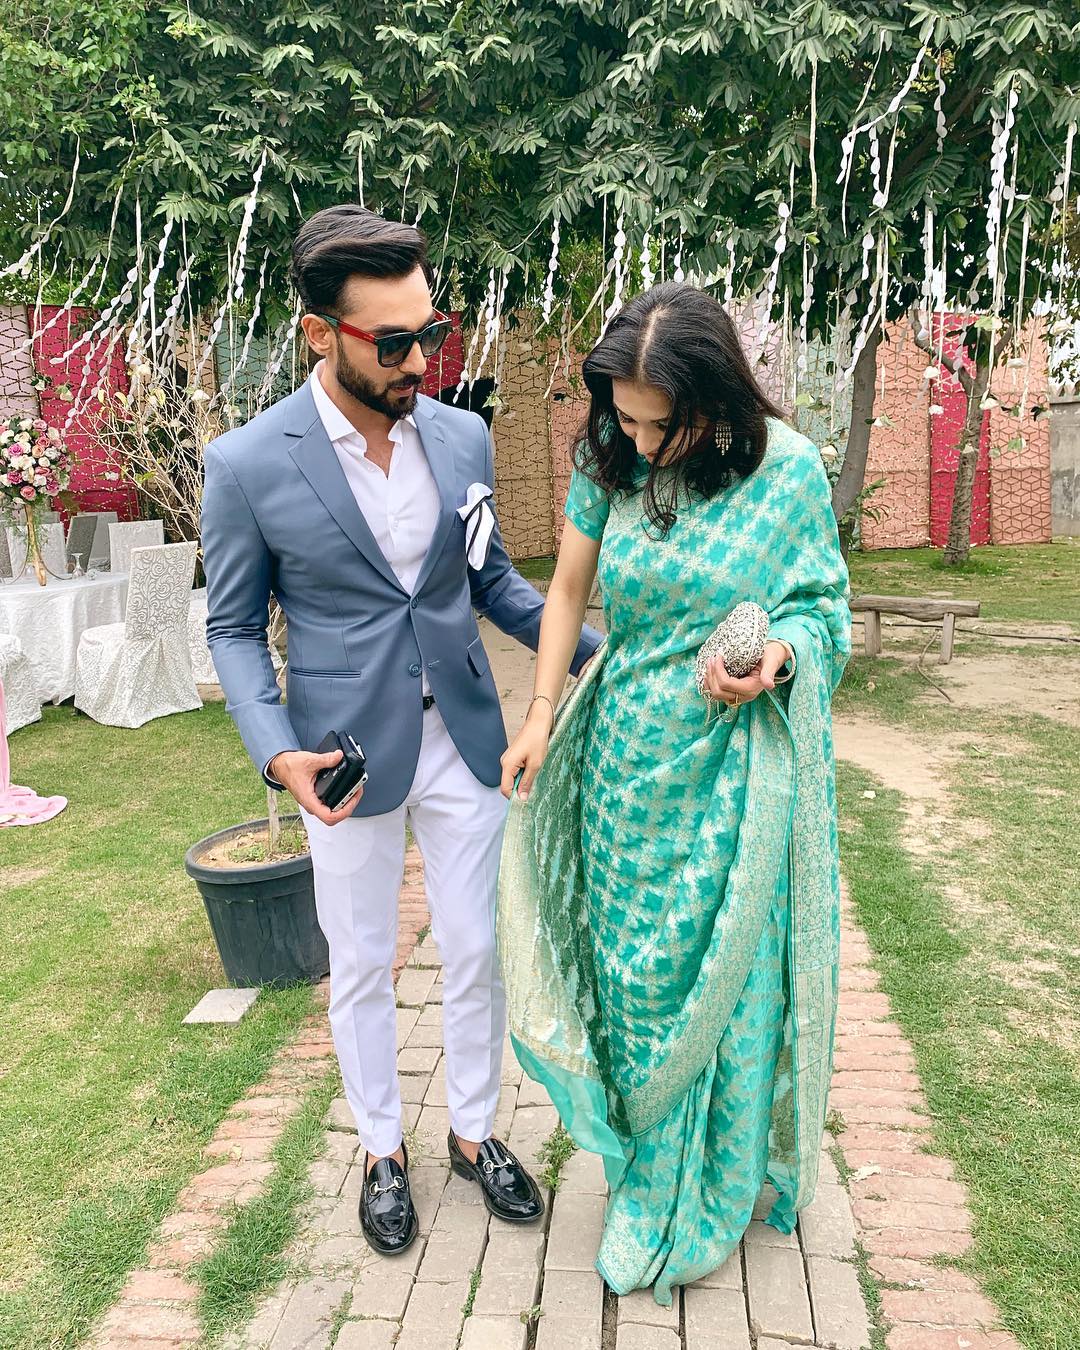 Beautiful Clicks of Anchor Abdullah Sultan with his Wife and Son